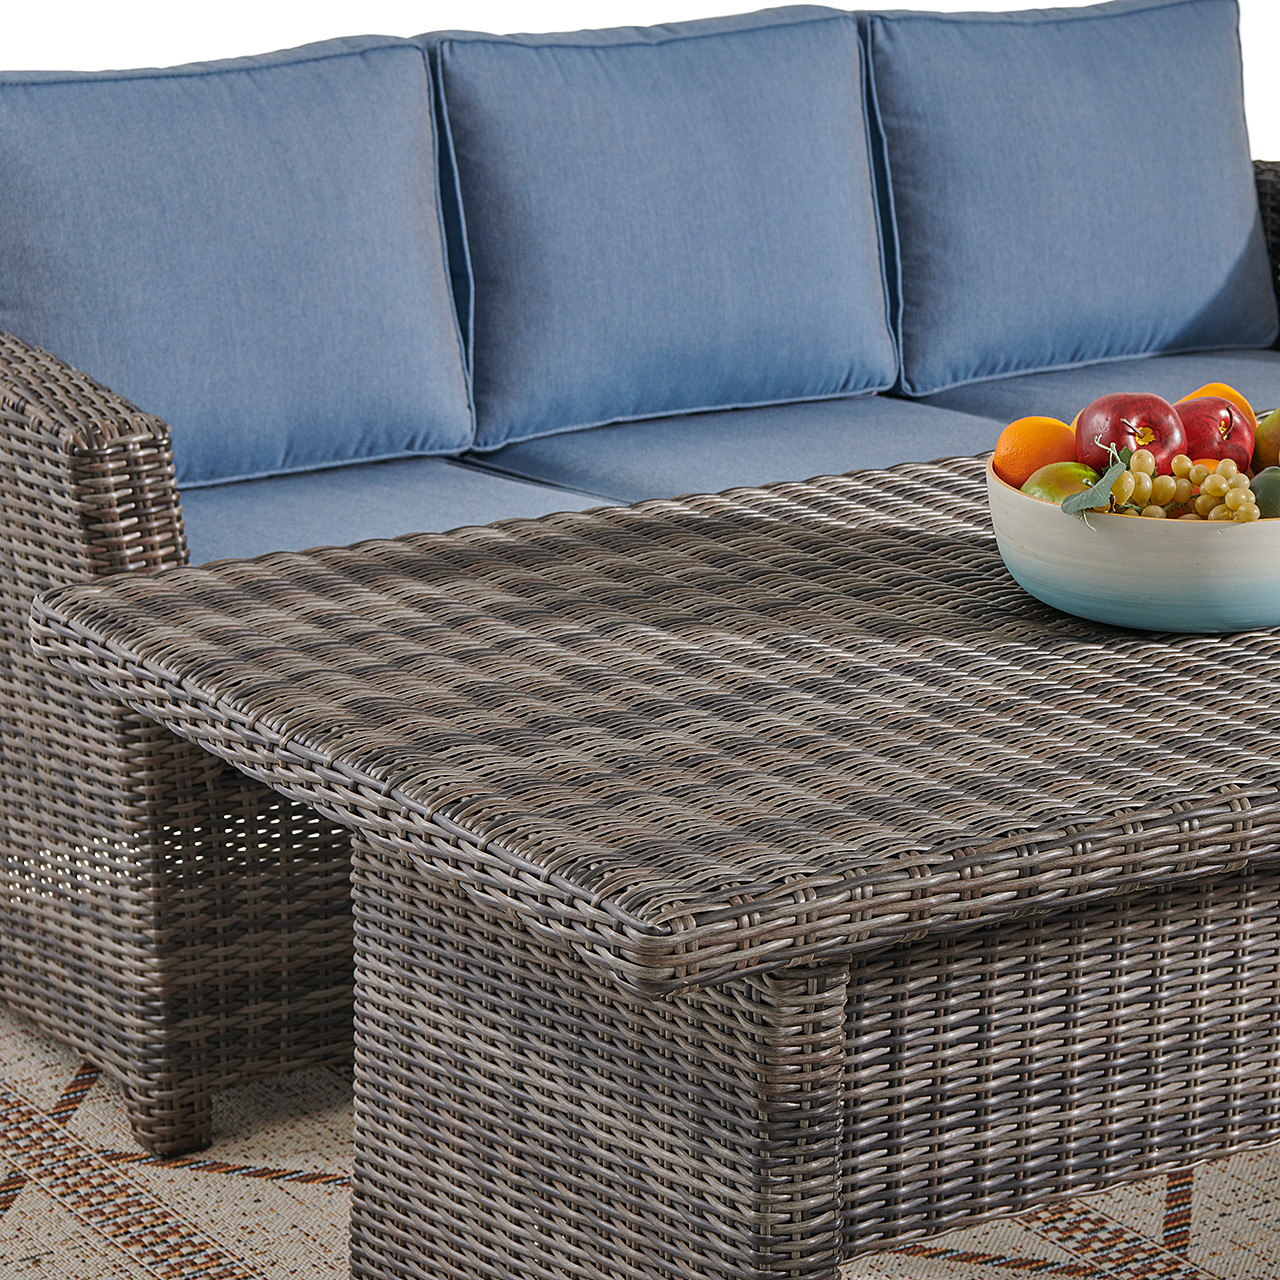 Venice Silver Oak Outdoor Wicker with Cushions 6 Piece Sofa Group + 59 x 32 in. Woven Top Lounge Table